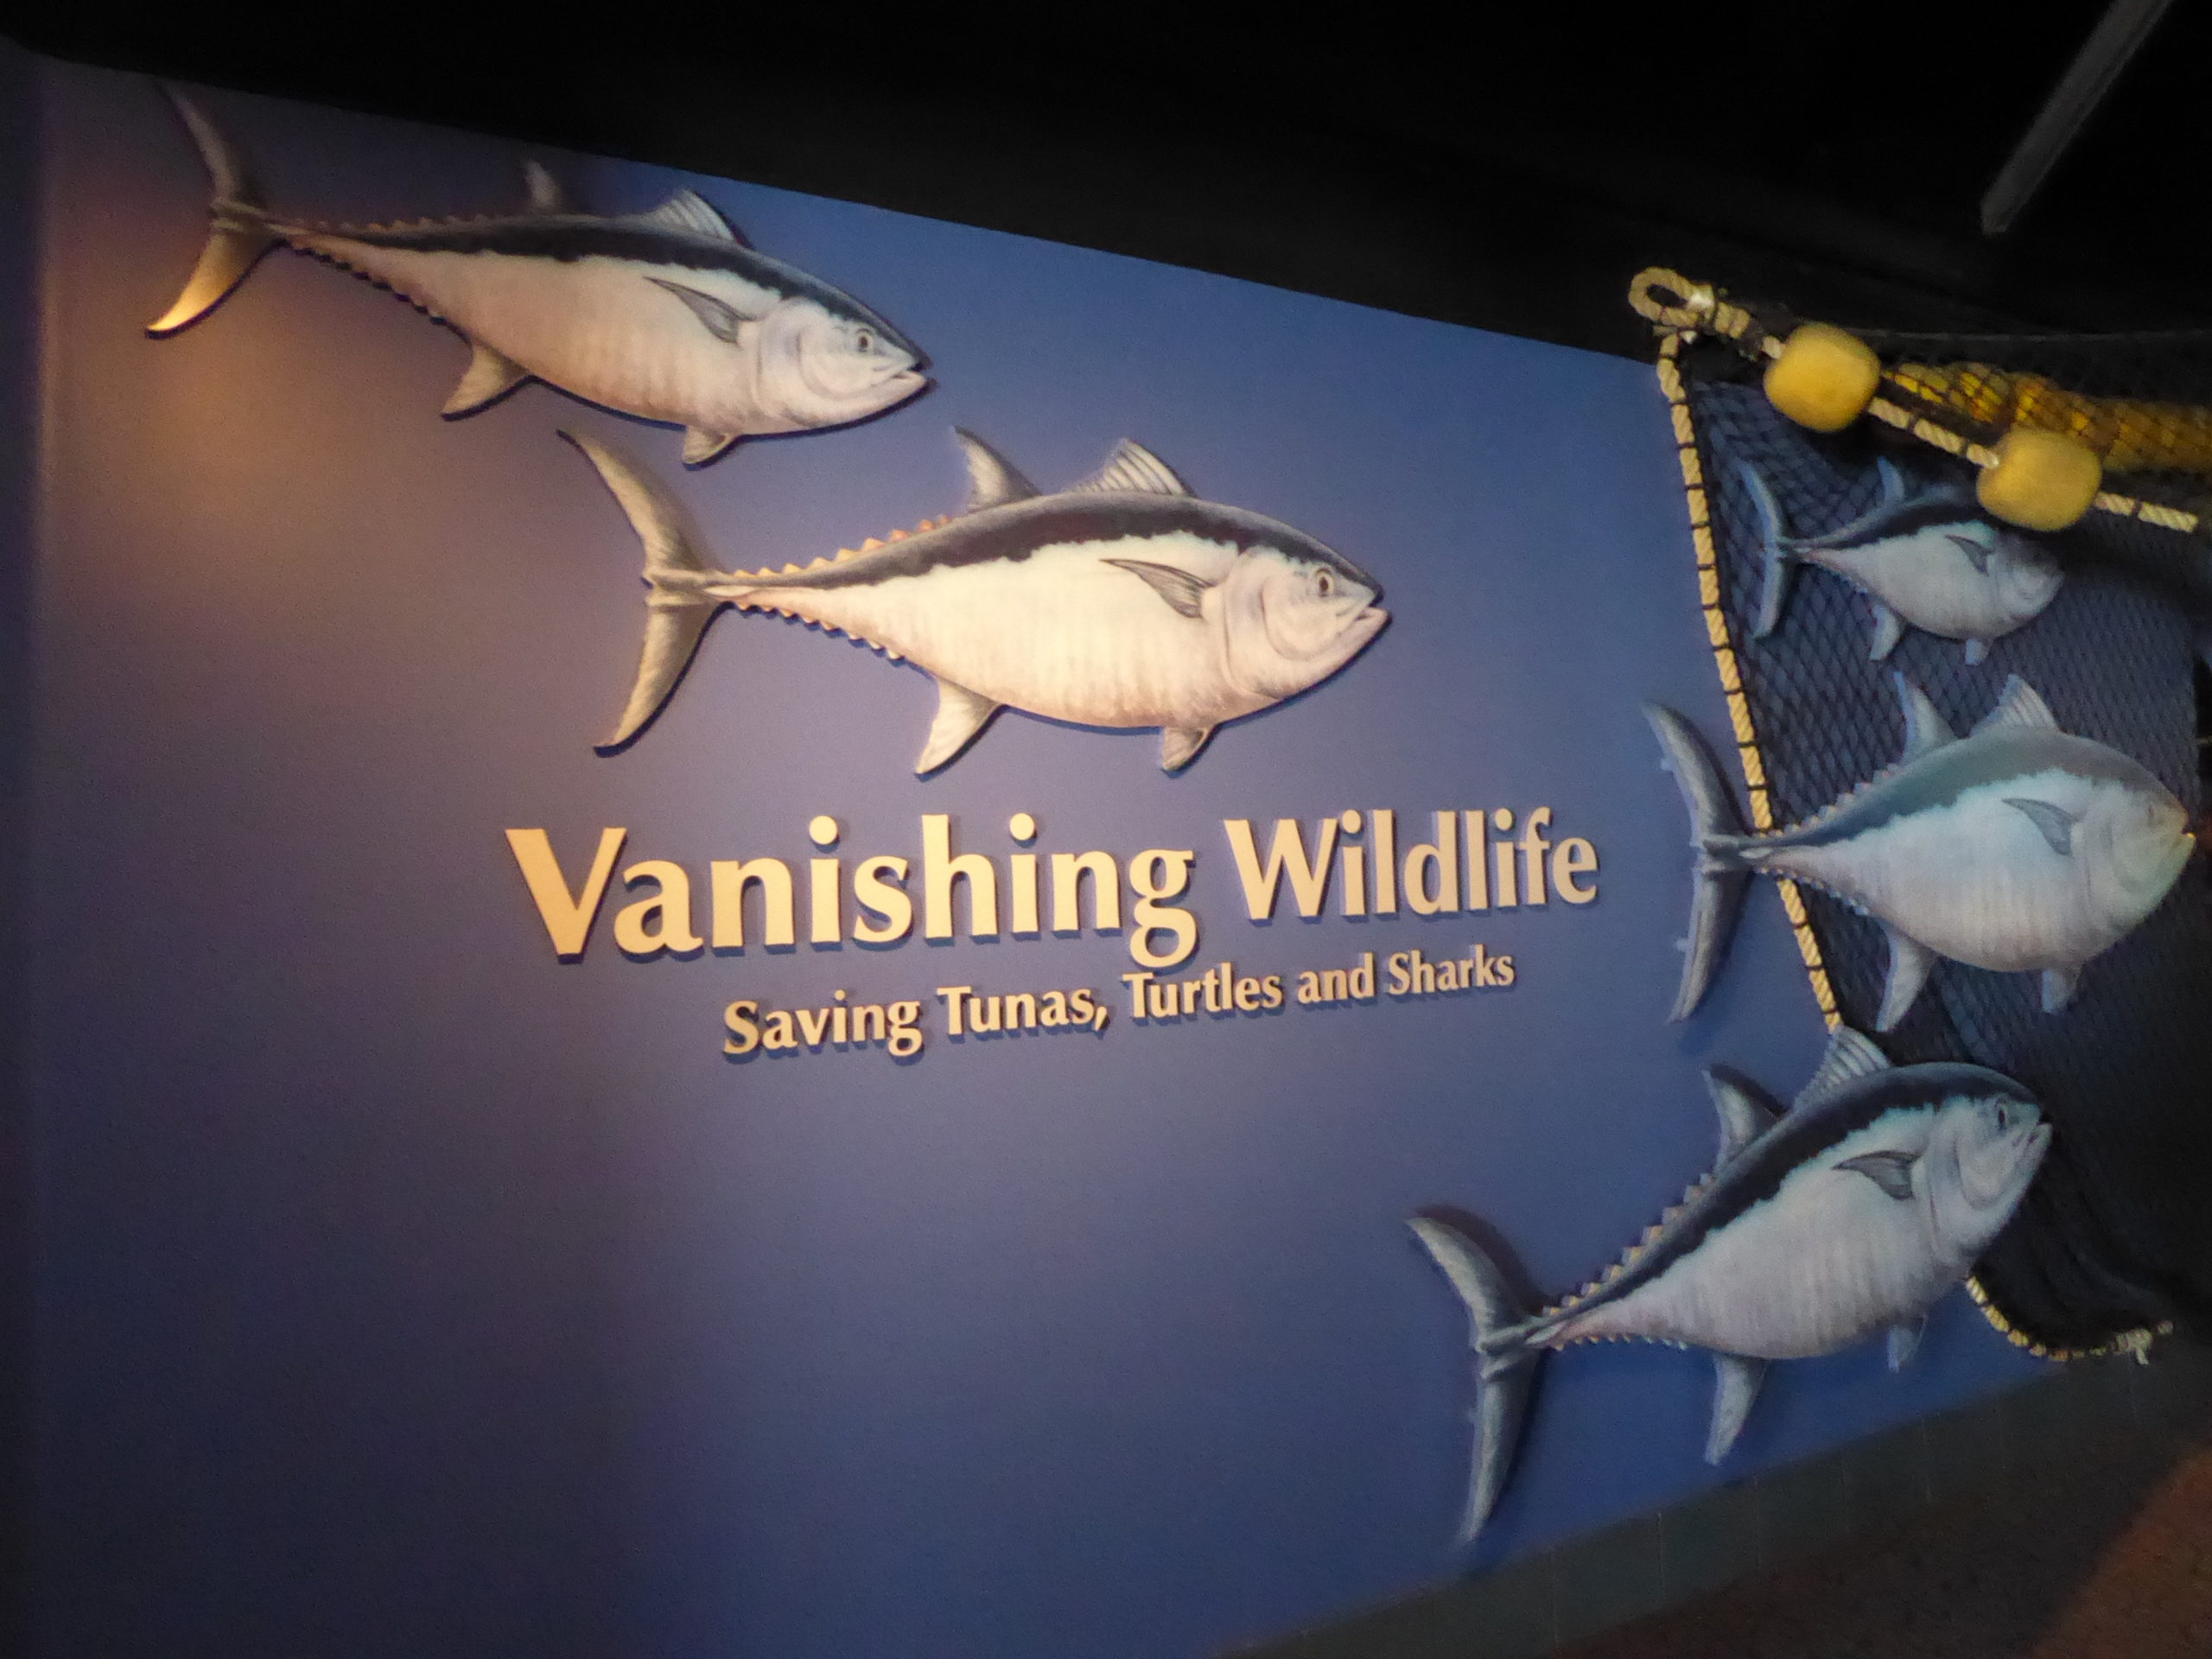 The permanent exhibition also tells the story of wildlife conservation